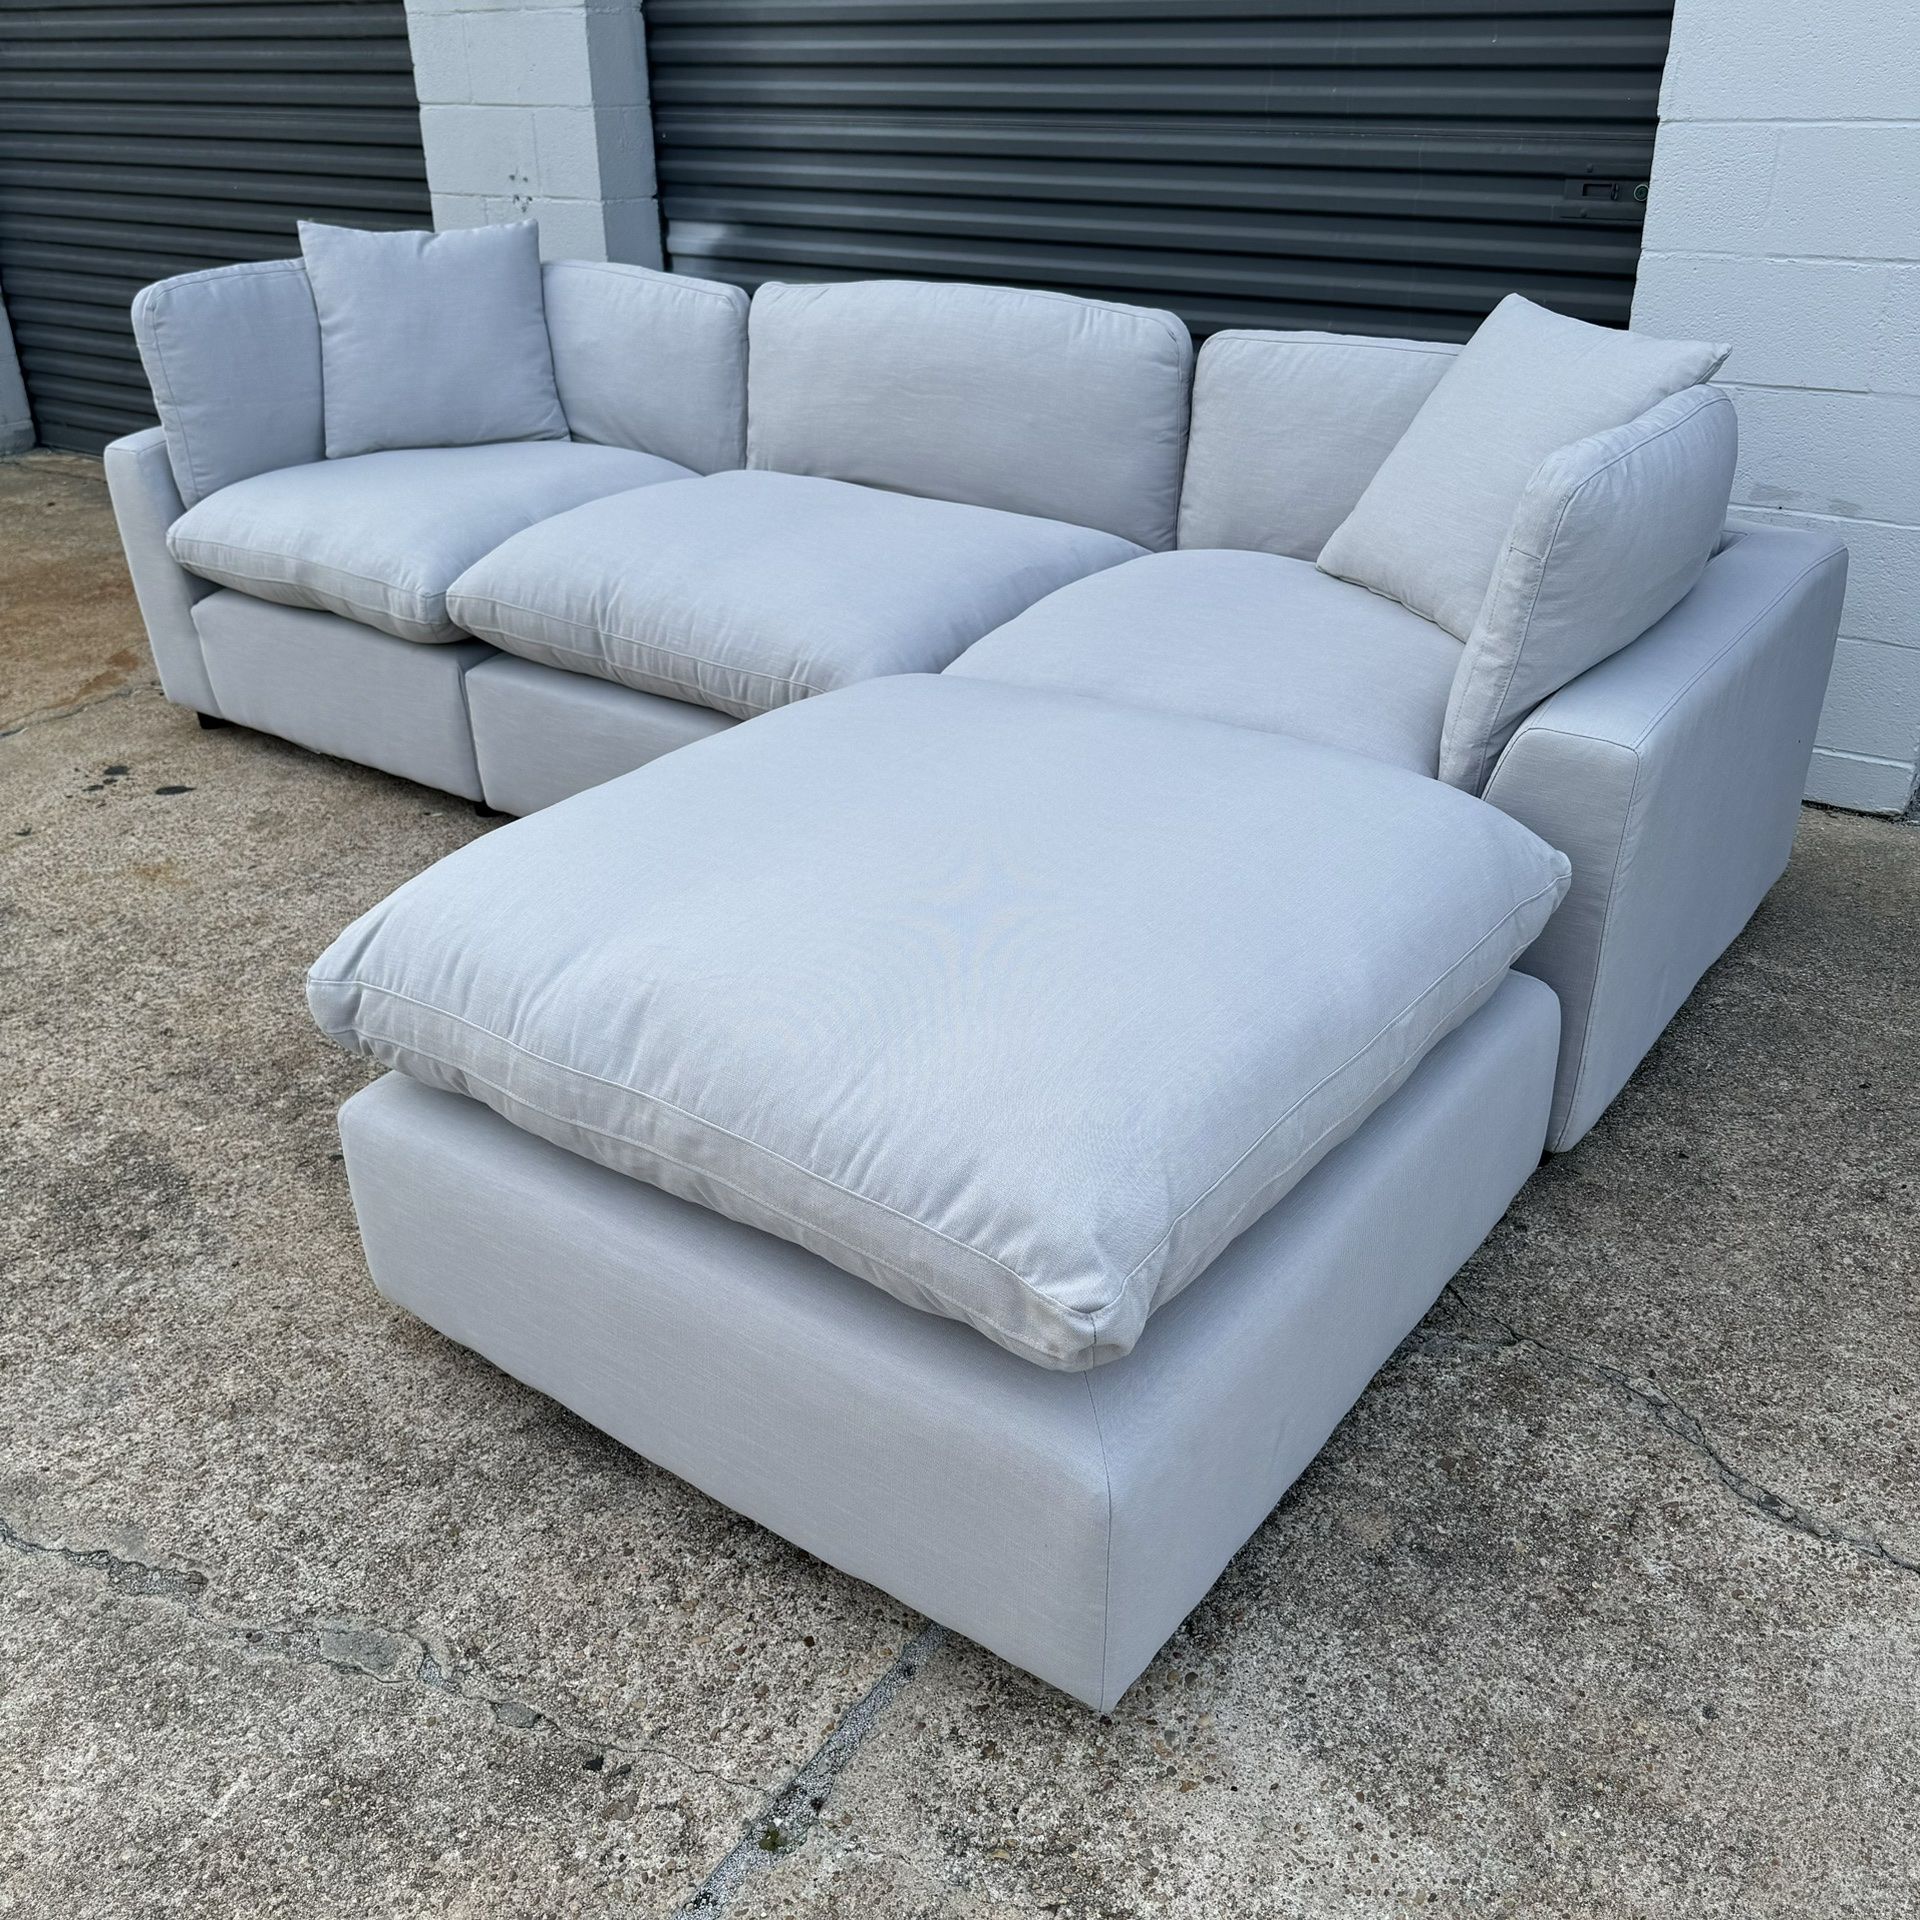 Luxury Cloud Couch Modular Sectional 